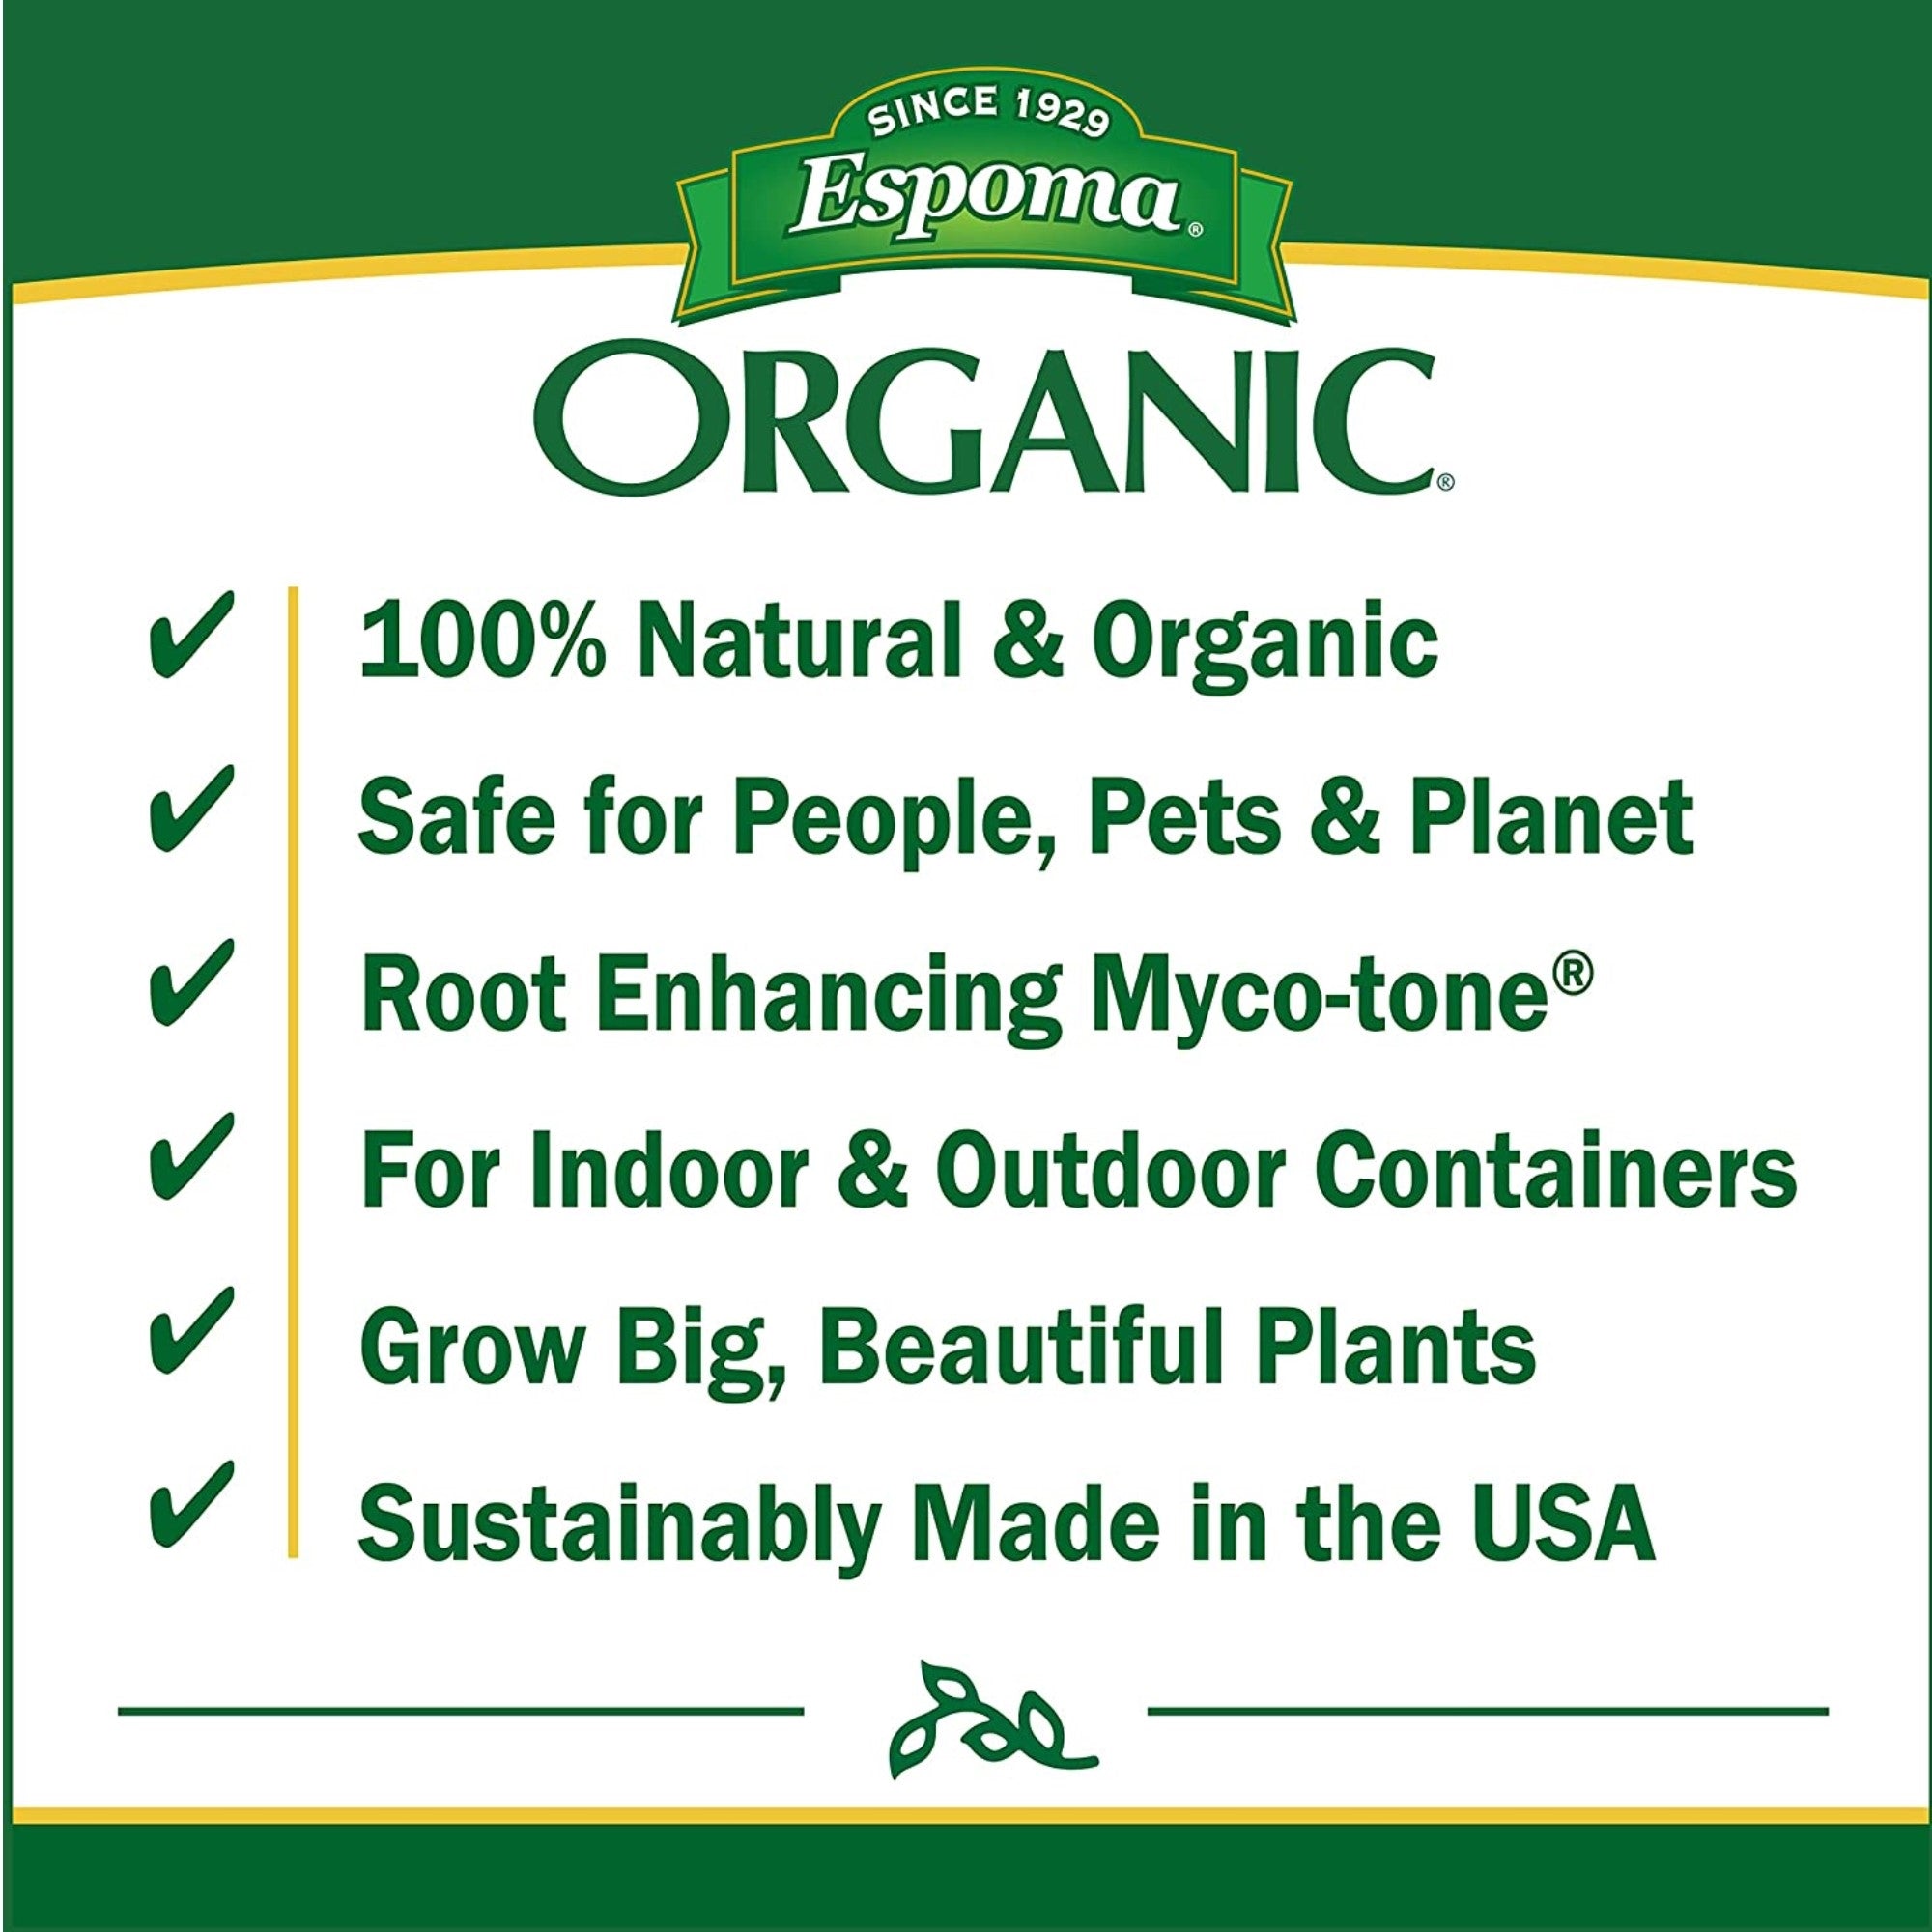 Espoma Organic Potting Soil Mix, All Natural Potting Mix For All Indoor or Outdood Potted Plants for Organic Gardening